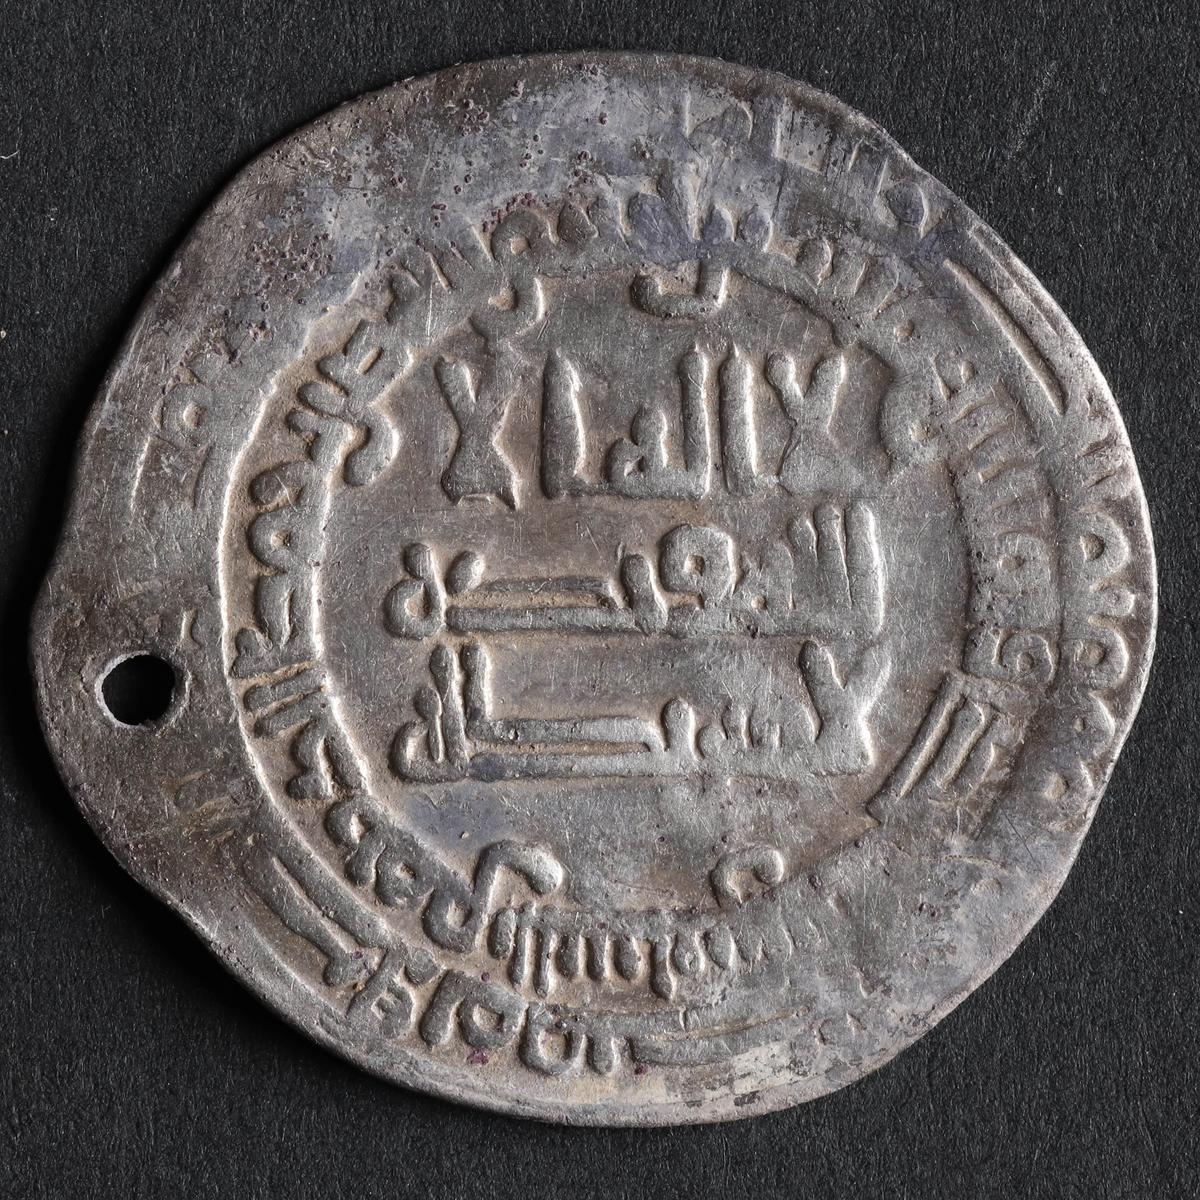 One of the few Arabic coins from one of the hoards; most of these the Vikings cut into pieces. (Photos from Nordjyske Museer, Denmark)